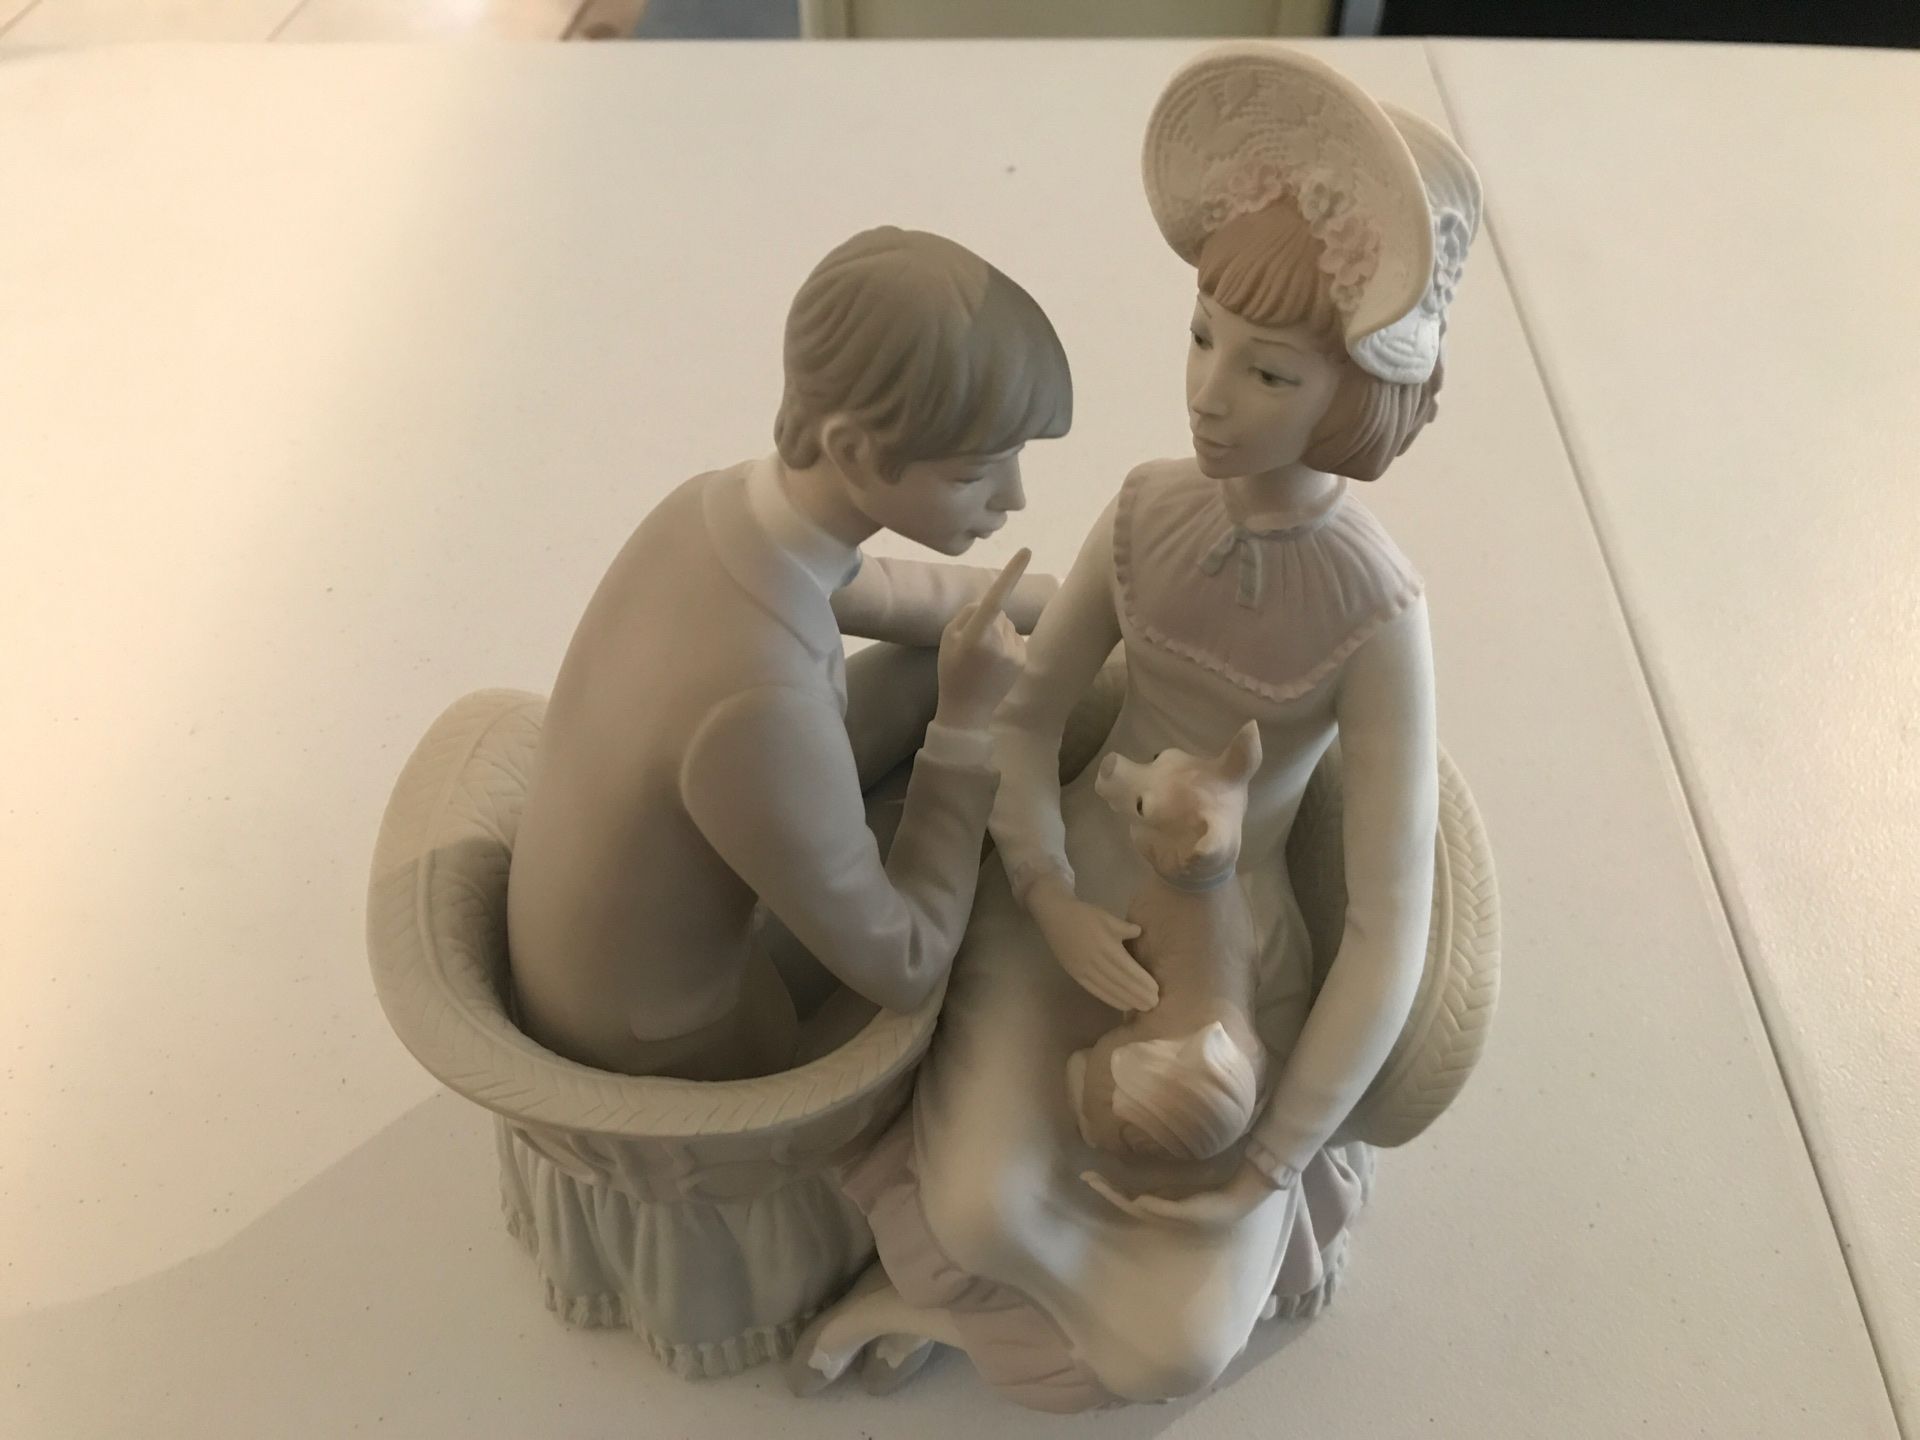 Lladro Porcelain Figurine Model #4830 "You And Me"